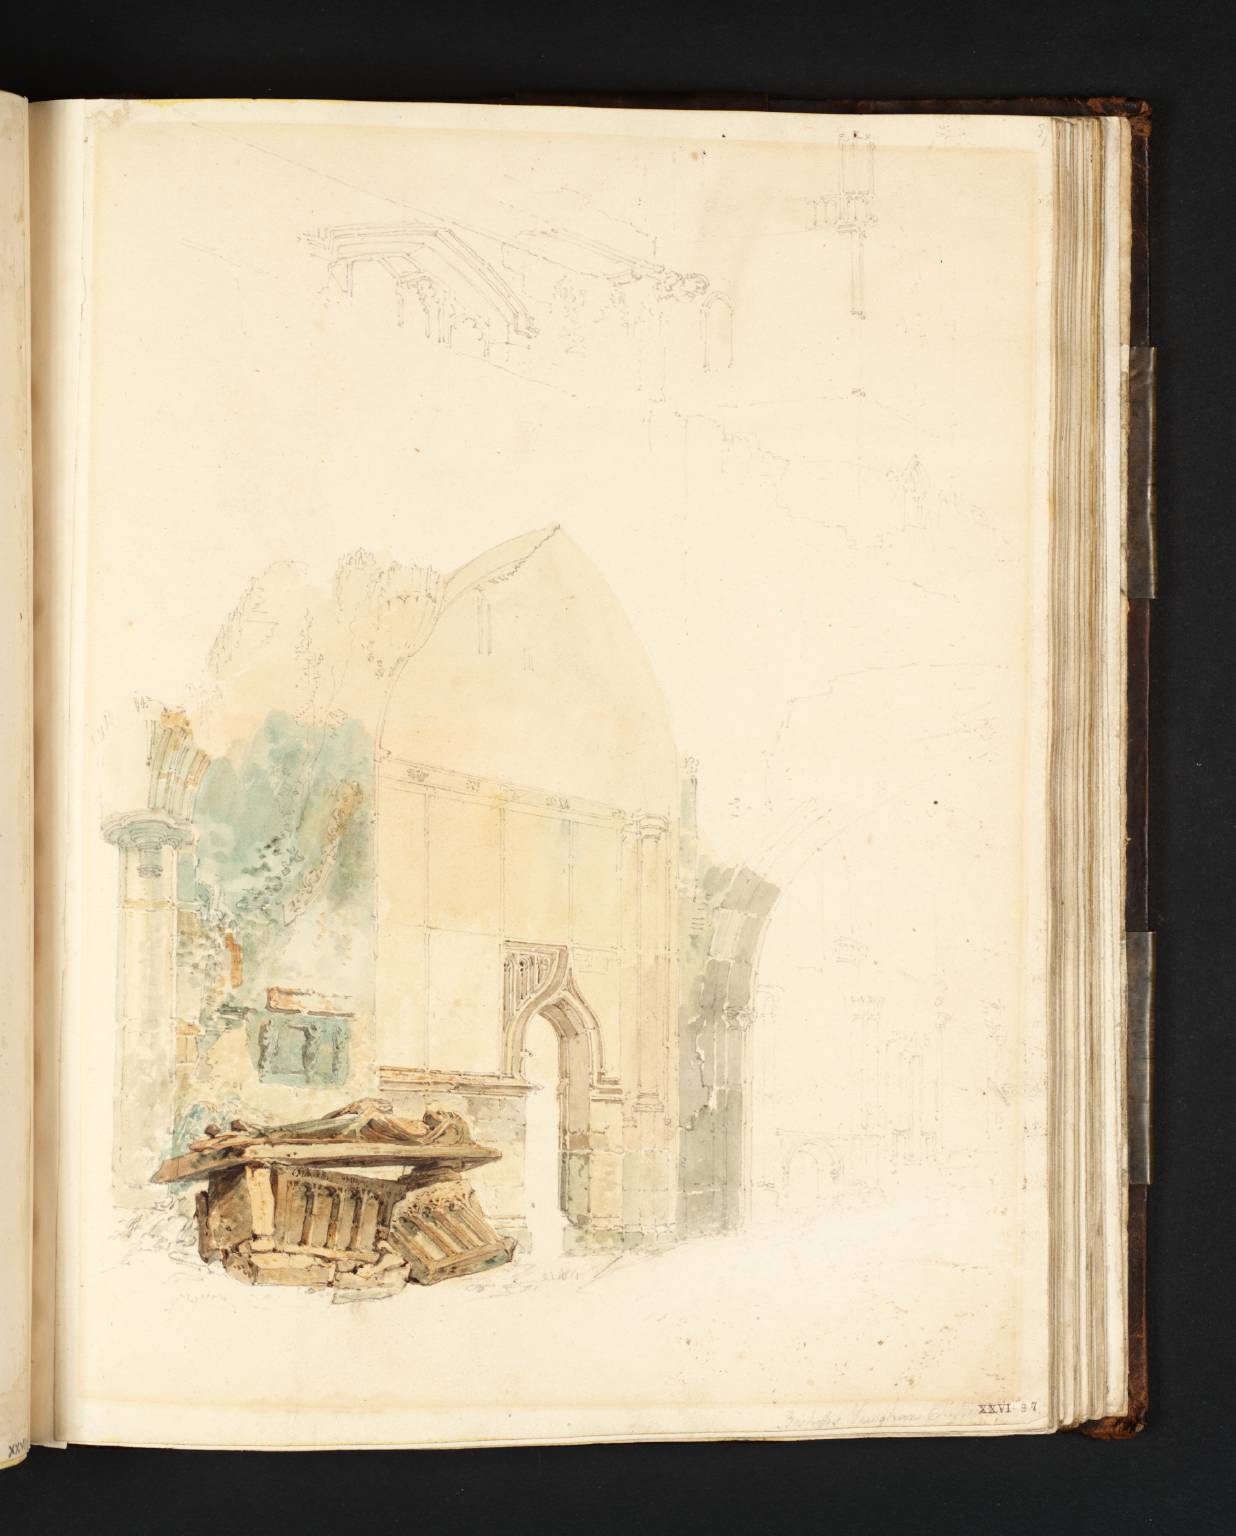 J. M. W. Turner, St David’s: The Ruins of St Mary’s Chapel and the Entrance to Bishop Vaughan’s Chapel, 1795, Tate